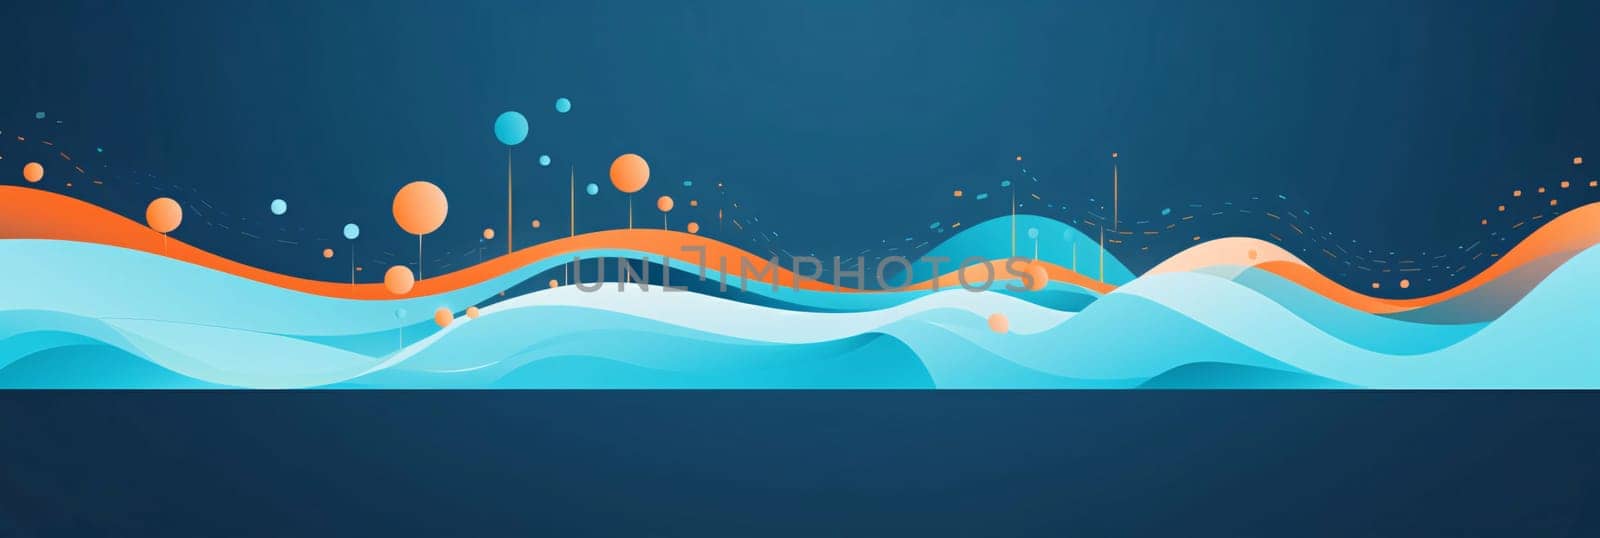 Banner: Abstract blue background with waves. Vector illustration. Can be used for wallpaper, web page background, web banners.